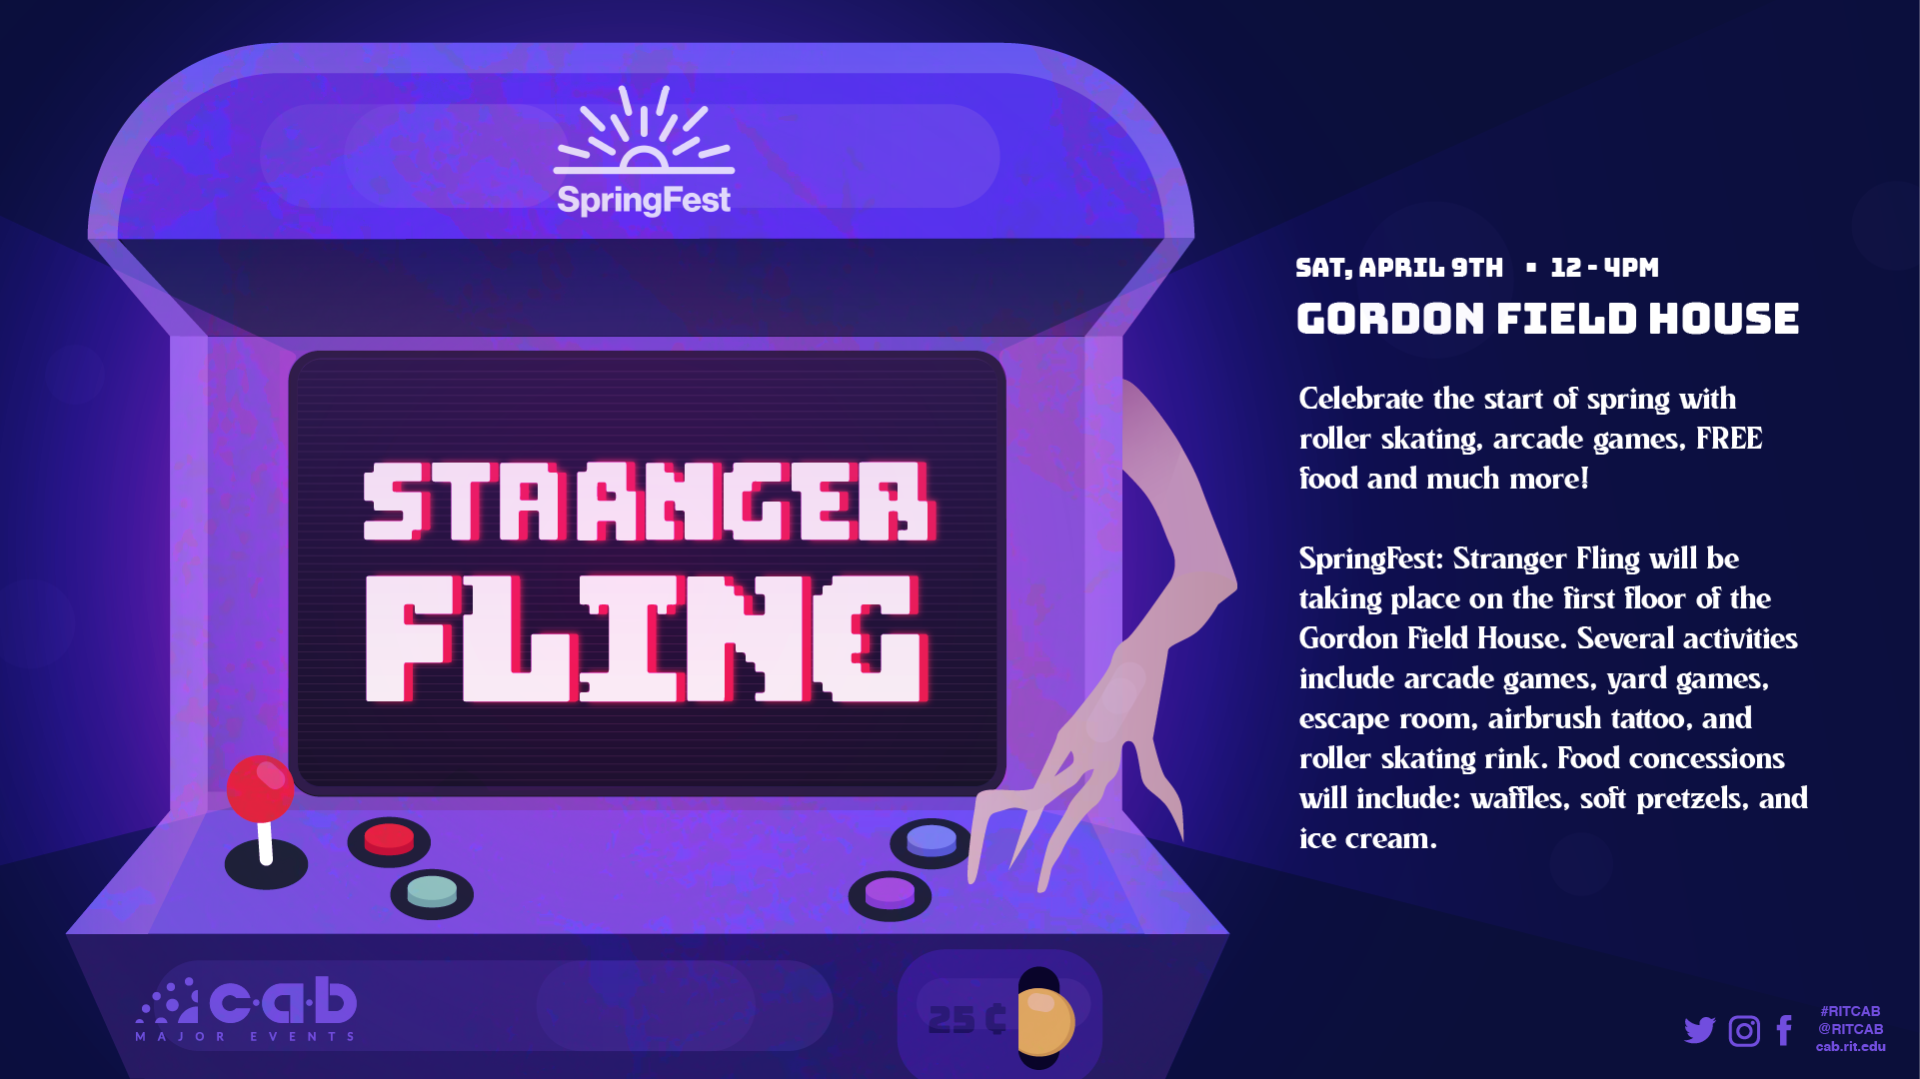 Stranger Fling will be taking place on the first floor of the Gordon Field House. Several activities include arcade games, yard games, escape room, airbrush tattoo, roller skating rink and Food concessions will. Food stations include: waffles, hot dogs, soft pretzels, and ice cream. 